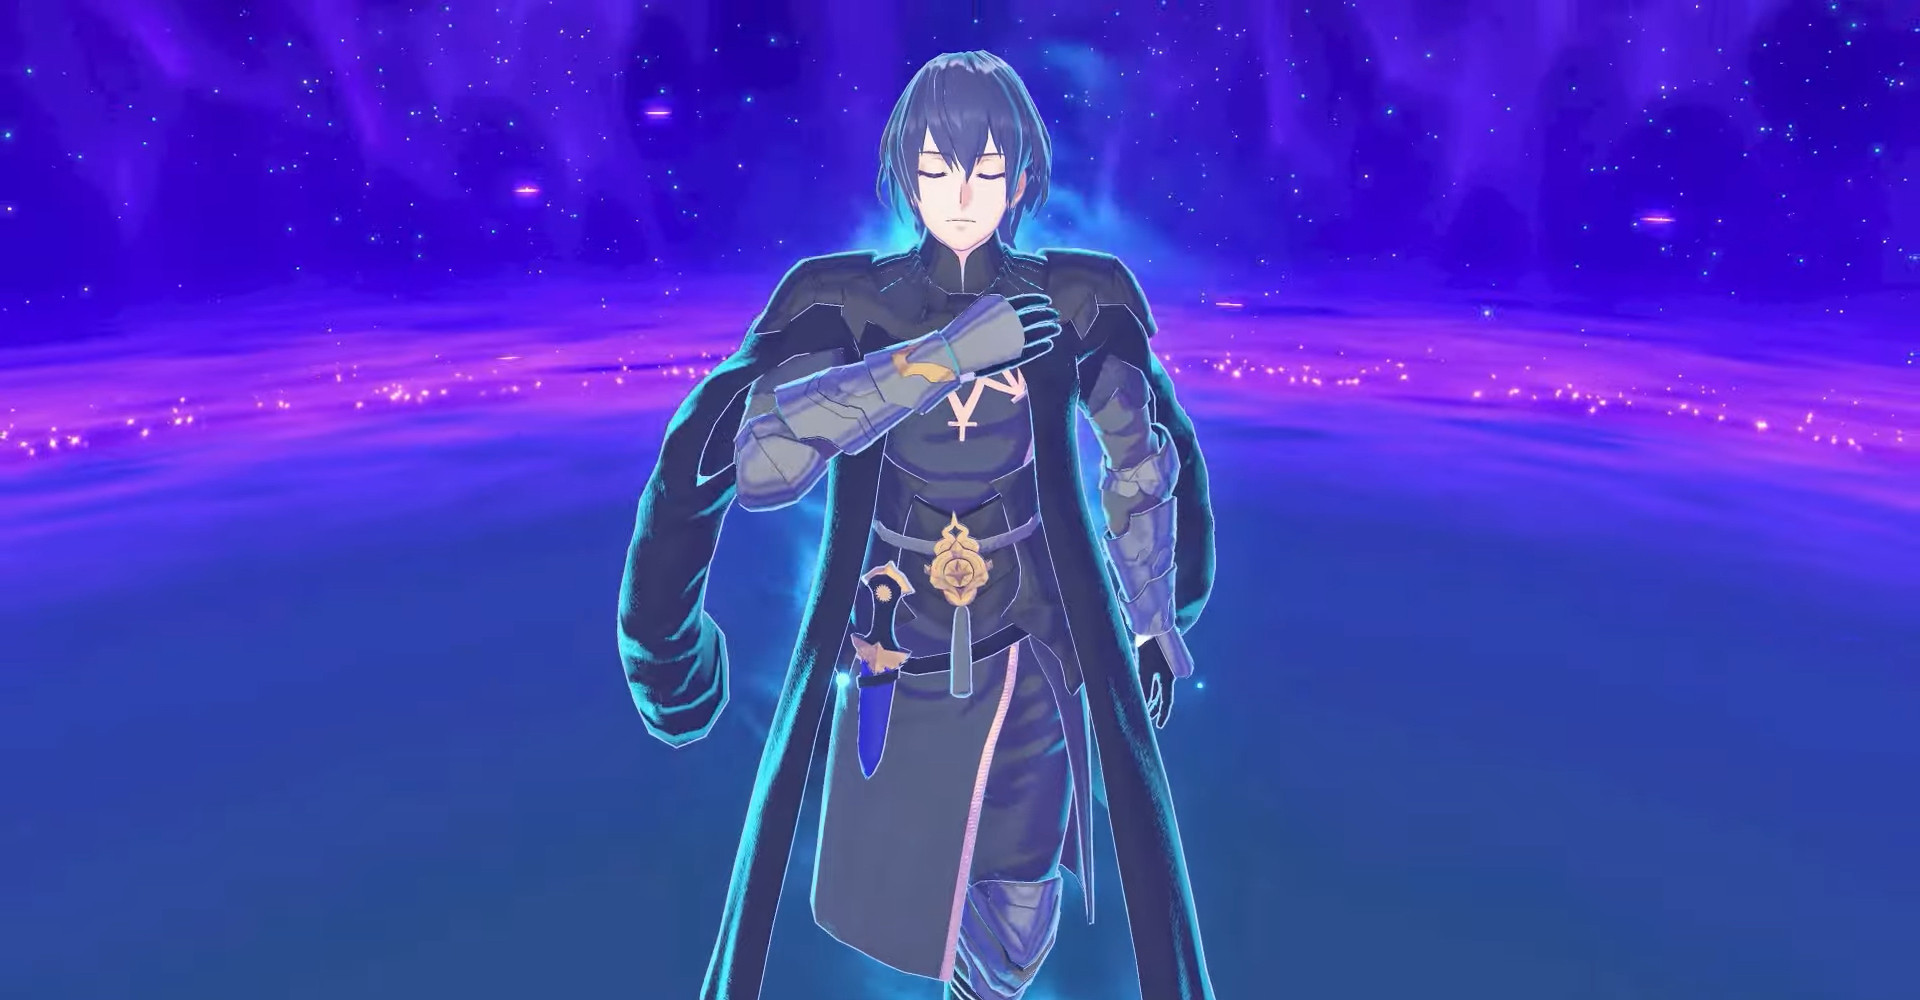 Byleth being summoned.